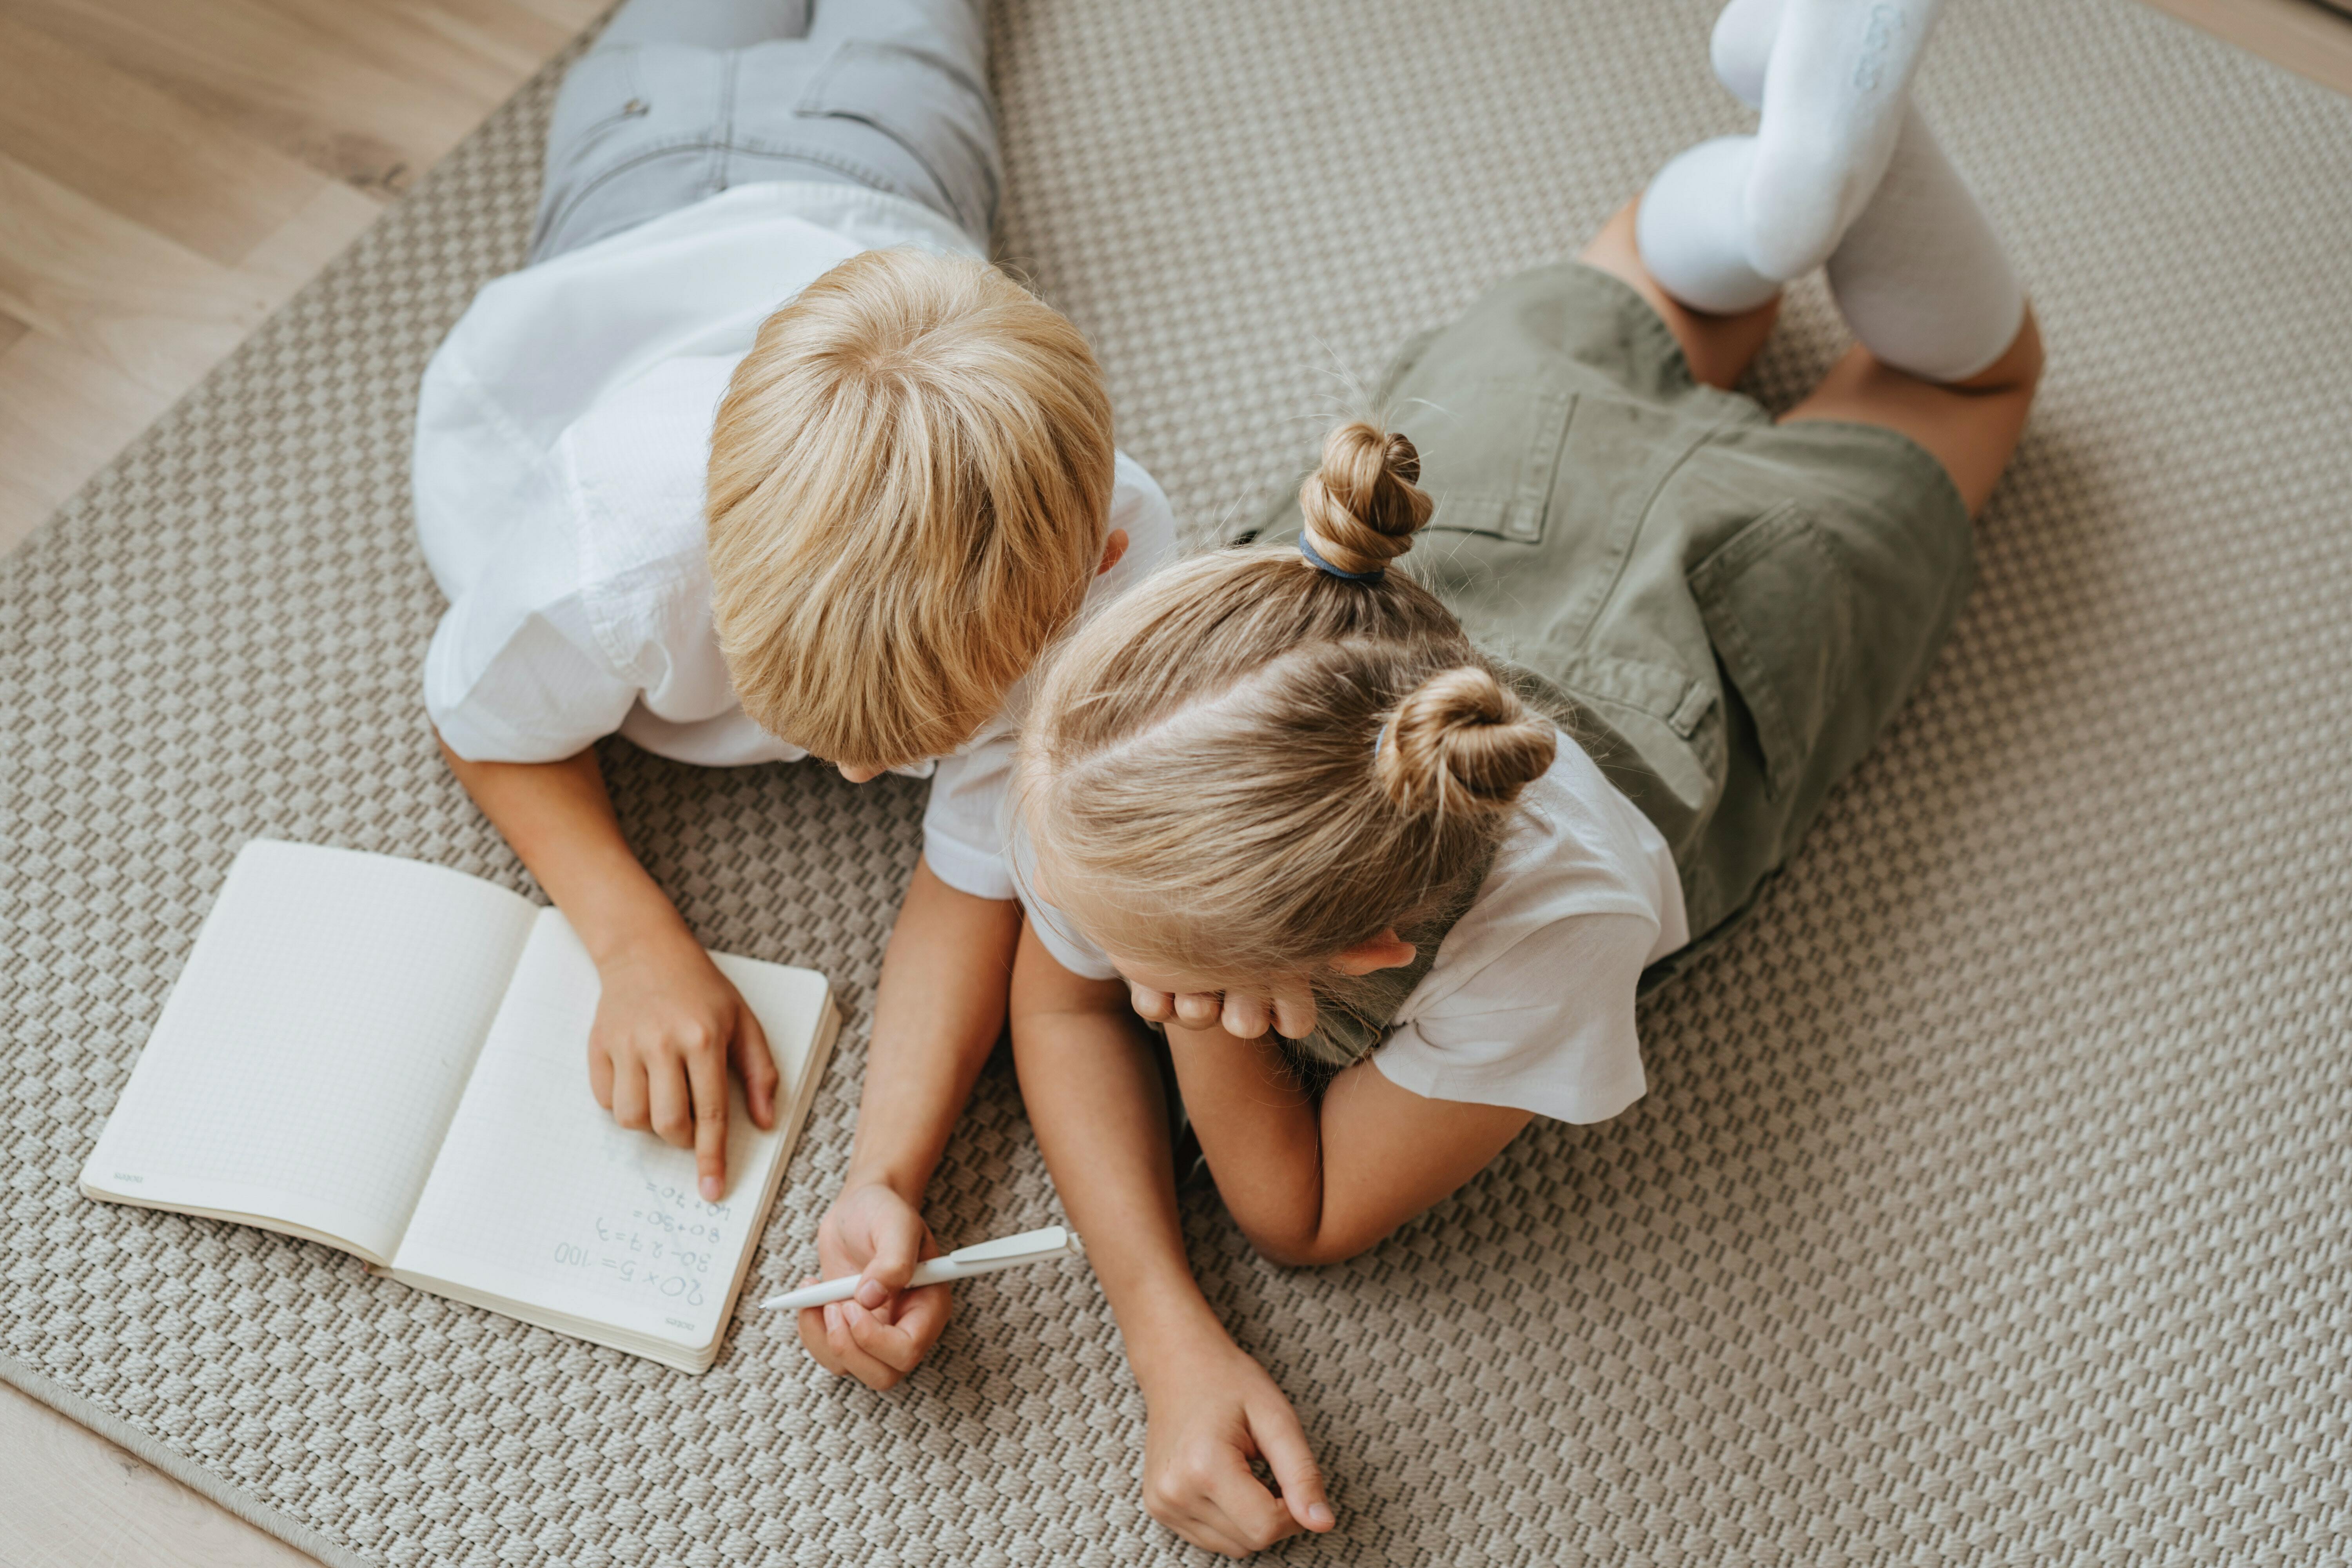 Two children writing on a book on the floor